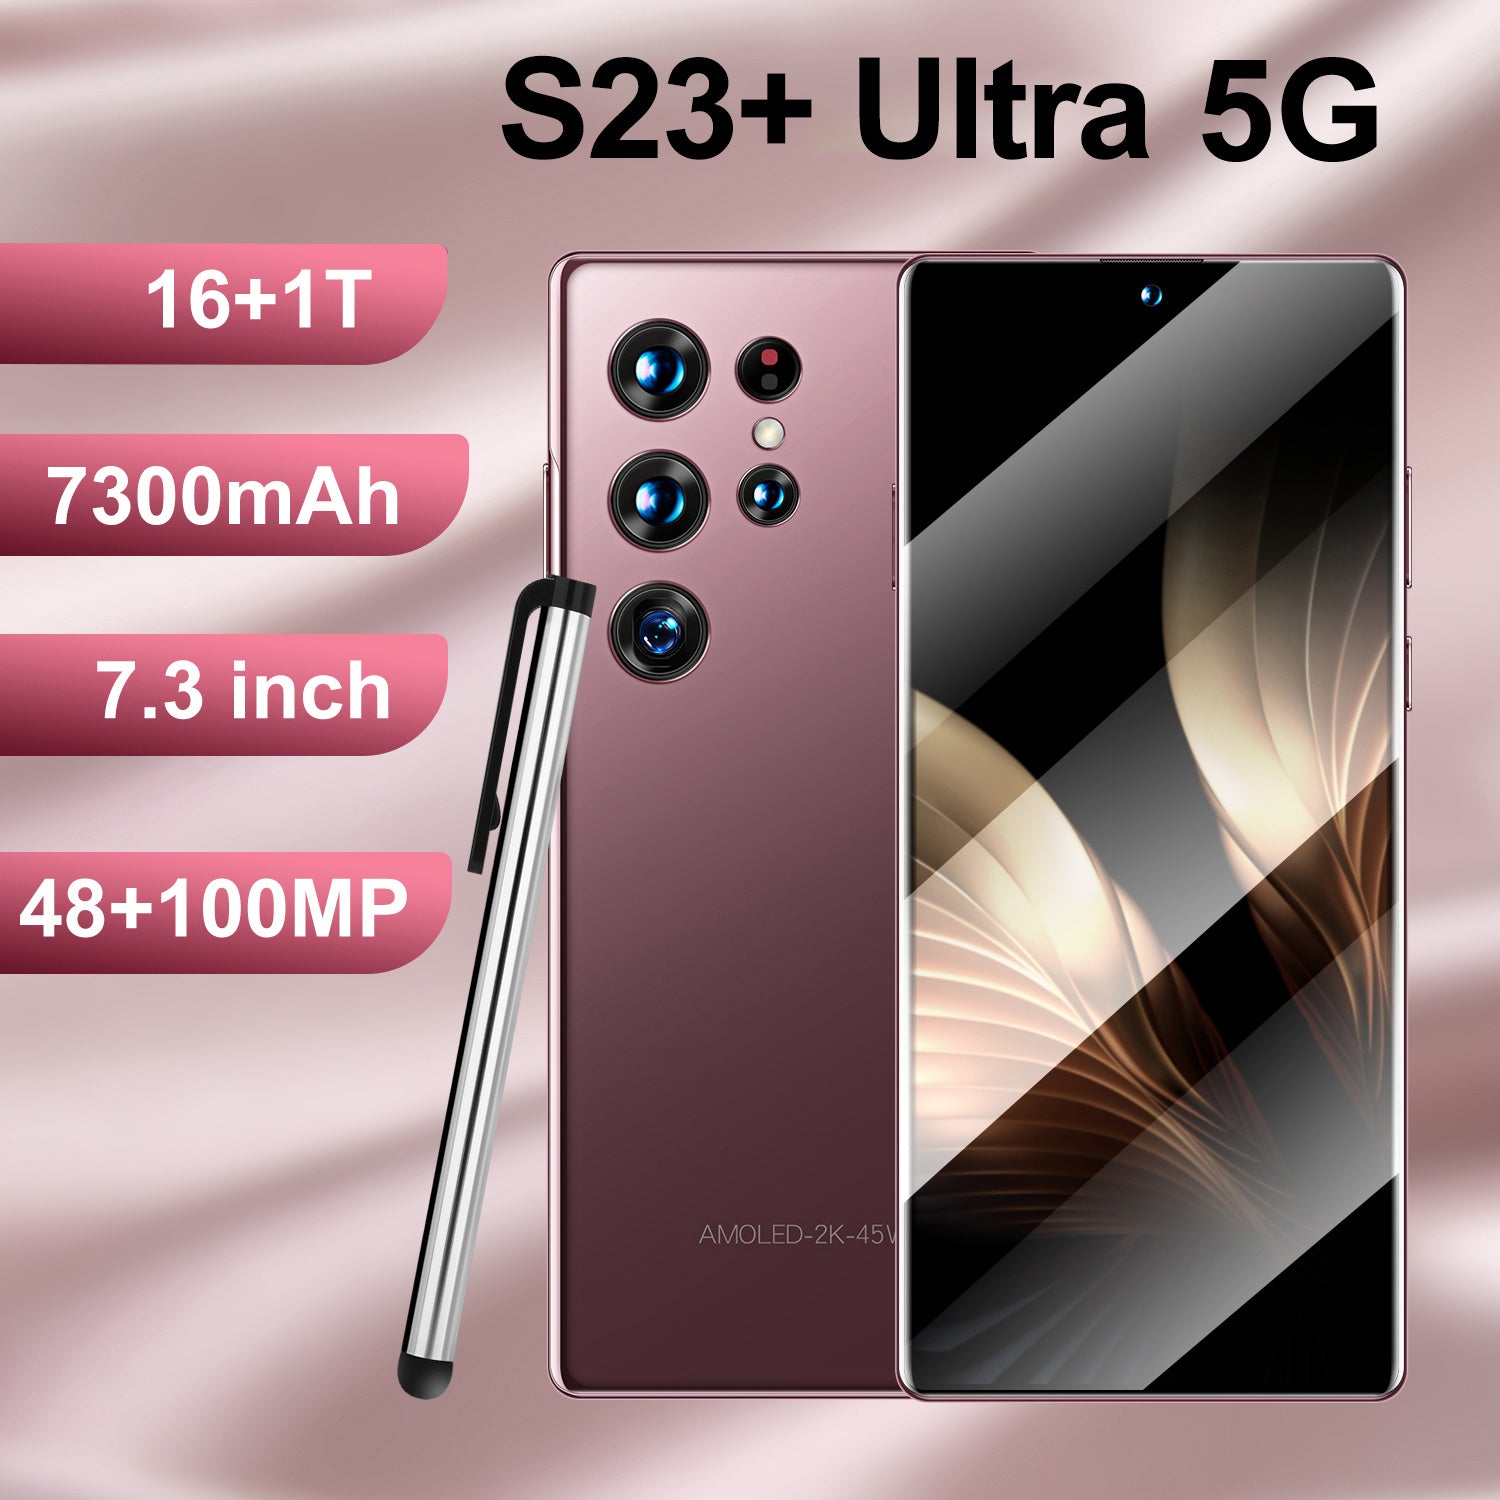 Hot Sale Brand New Smart Cell Phone S23+ Ultra Dual Nano SIM Android Version Ready In Stock